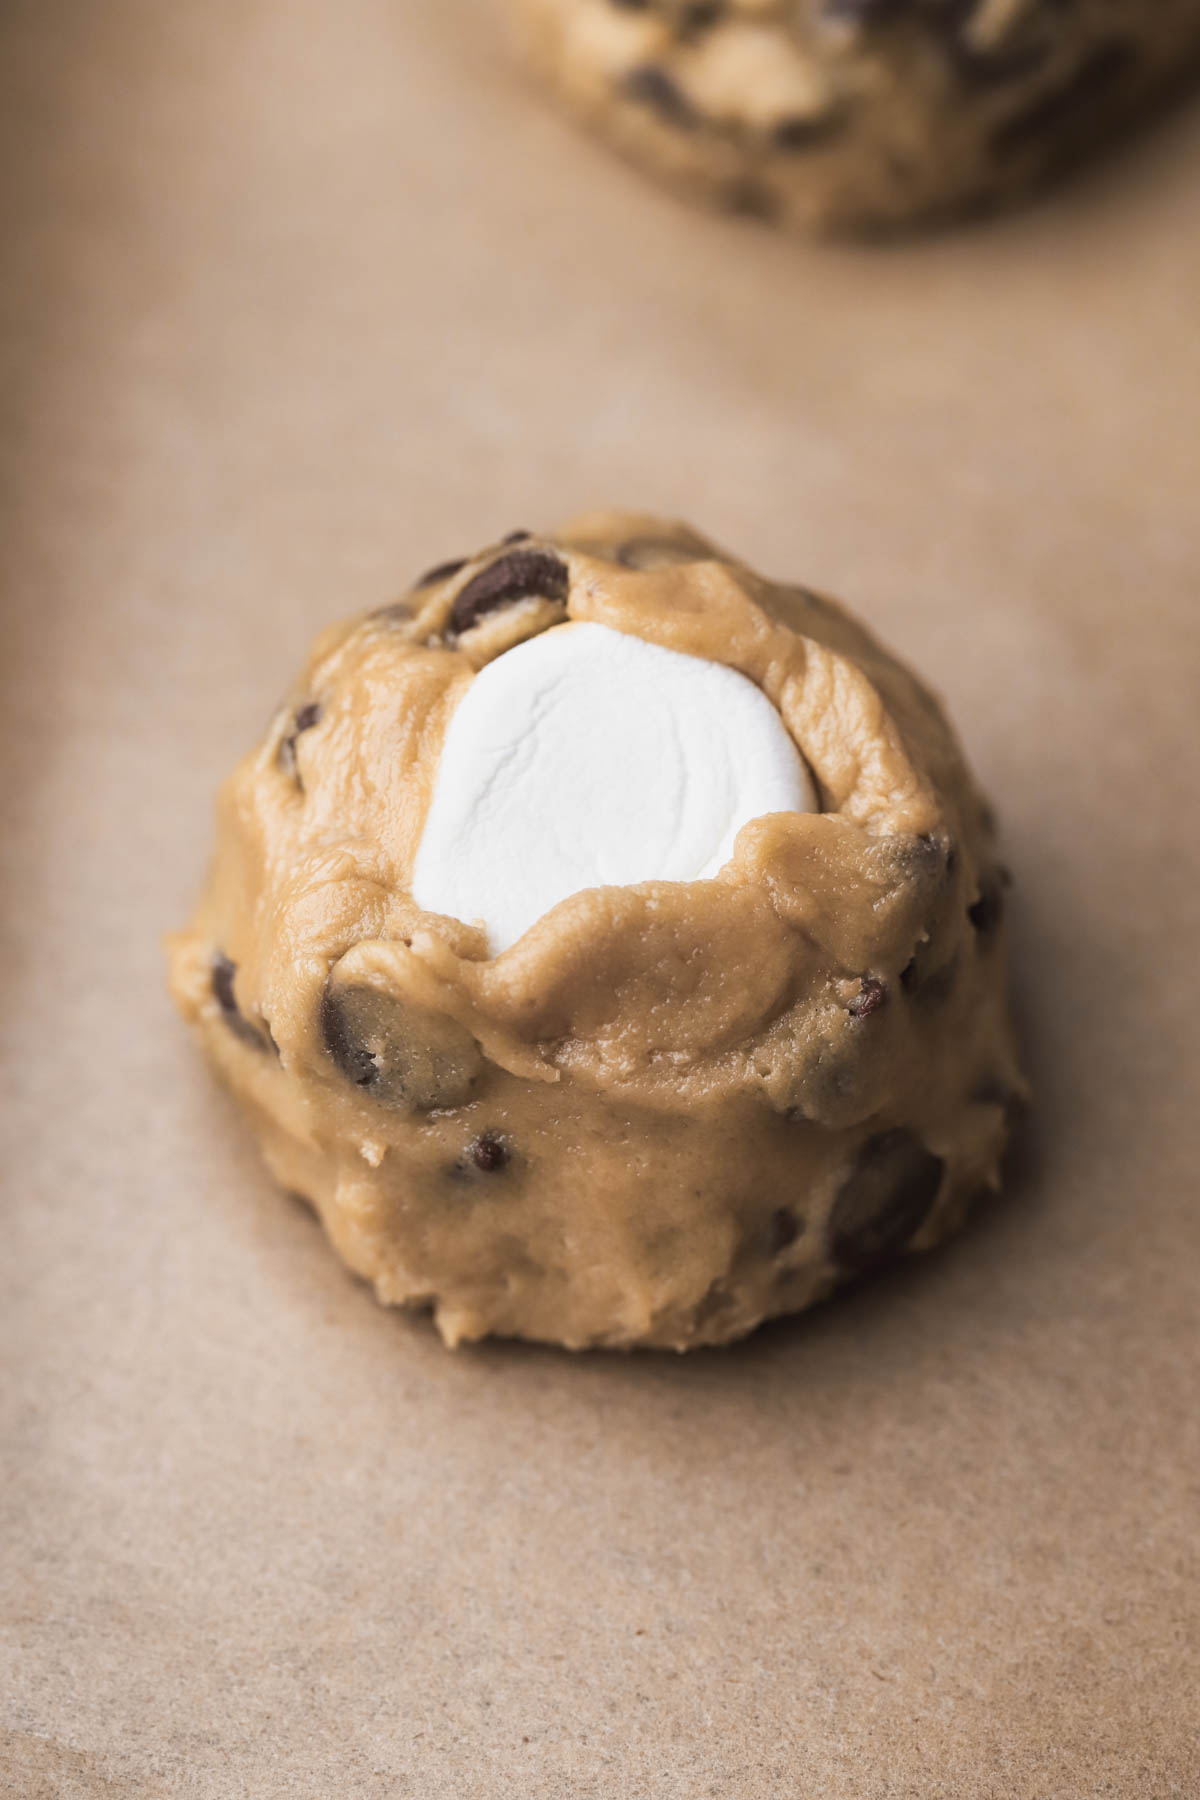 Scooped cookie stuffed with marshmallow.  